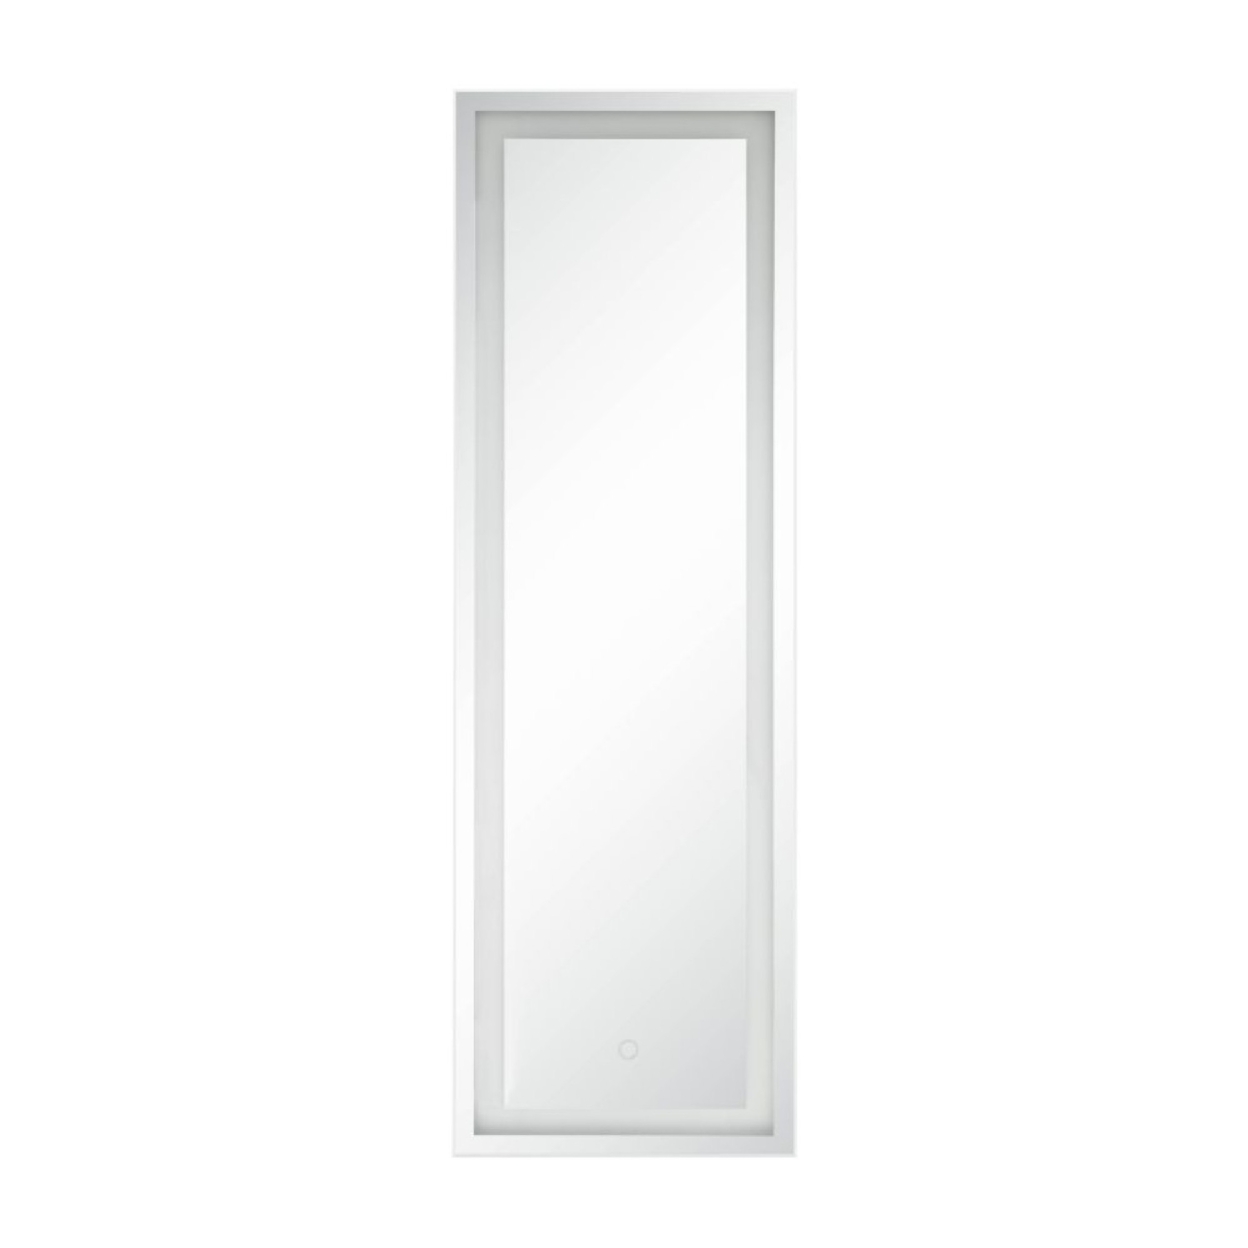 Floor Mirror With LED Touch Light And Rectangular Shape, Silver- Saltoro Sherpi